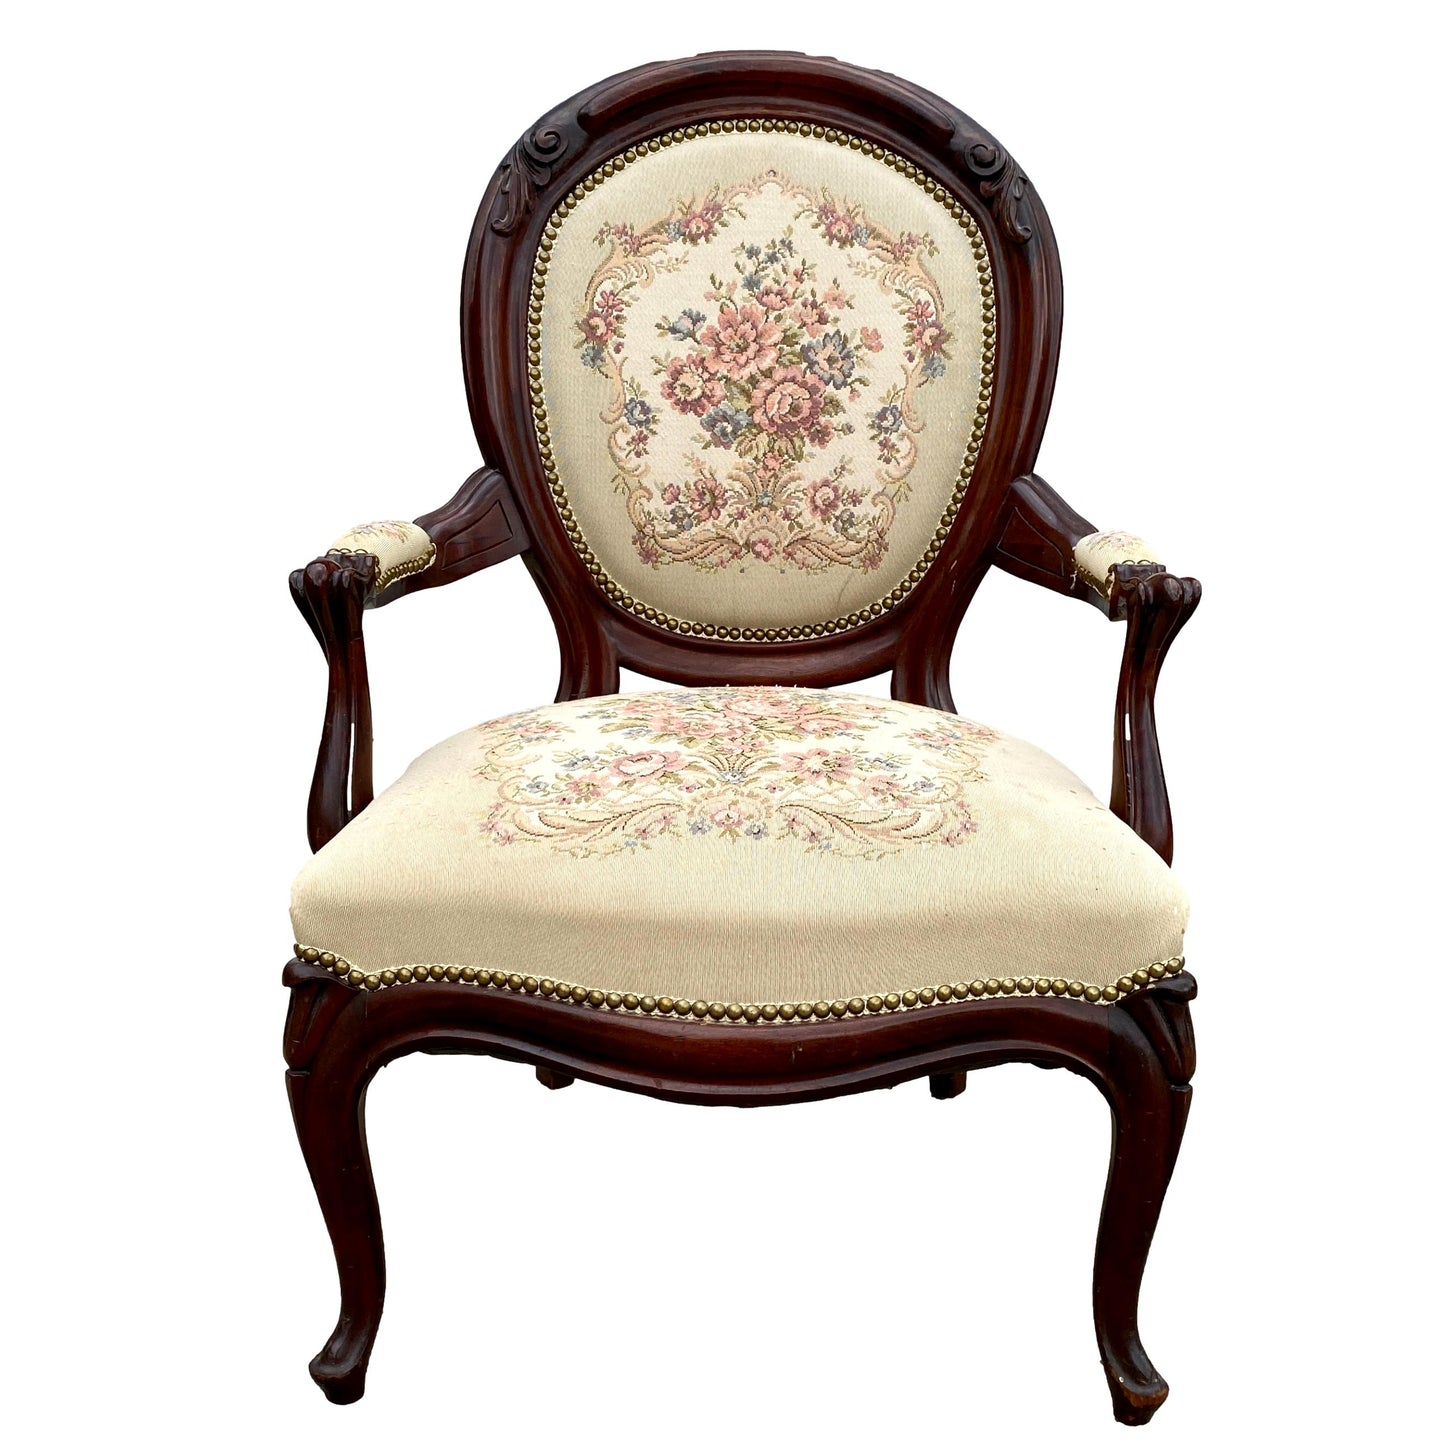 Pair of Floral Tapestry Chairs